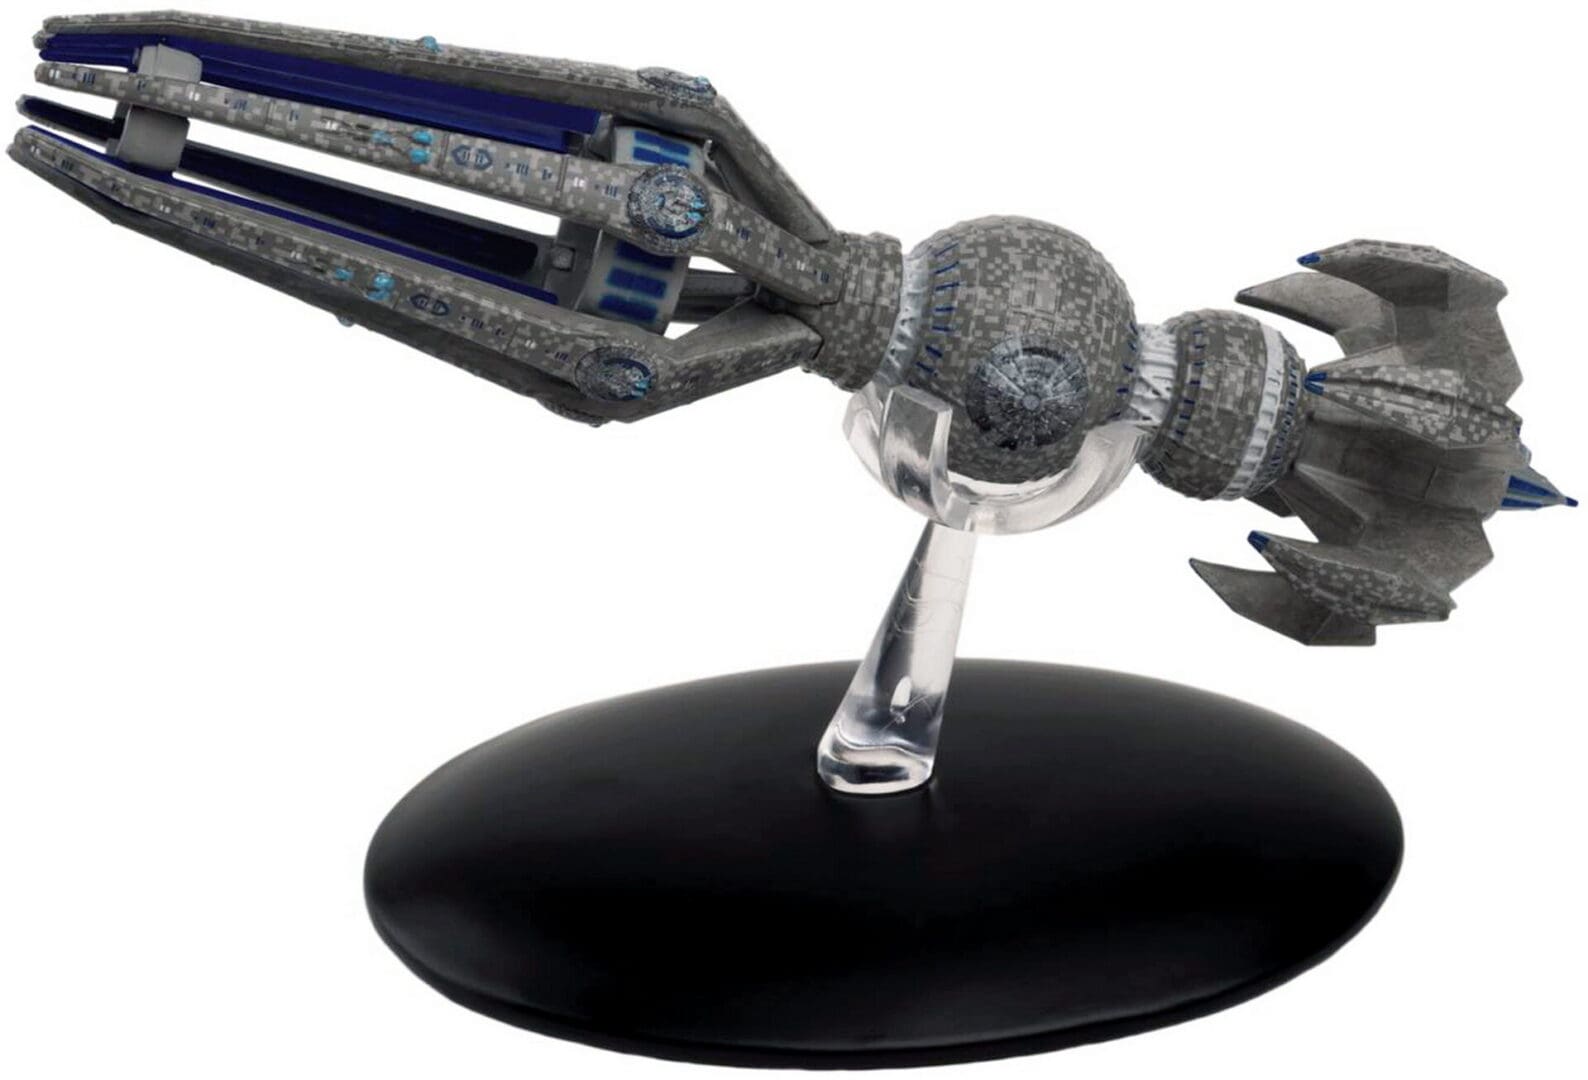 Grey and blue spaceship figurine on stand.